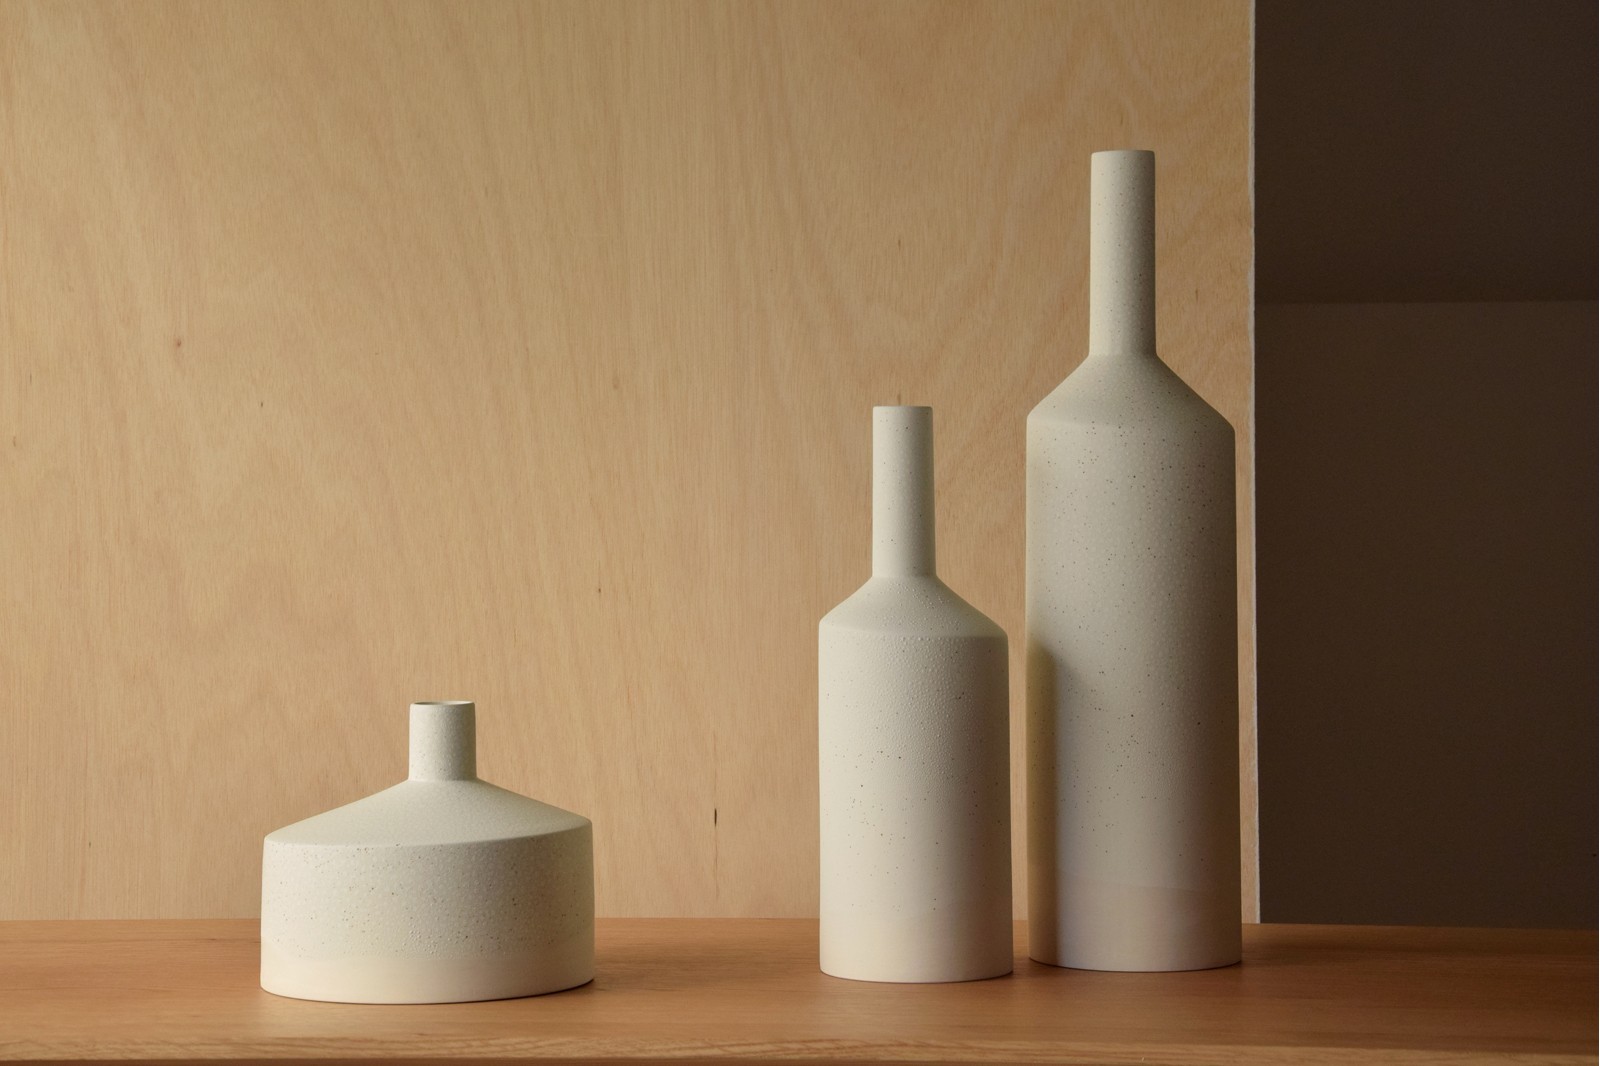 FIREPLACE COLLECTION: CERAMIC VASES AND CENTREPIECE